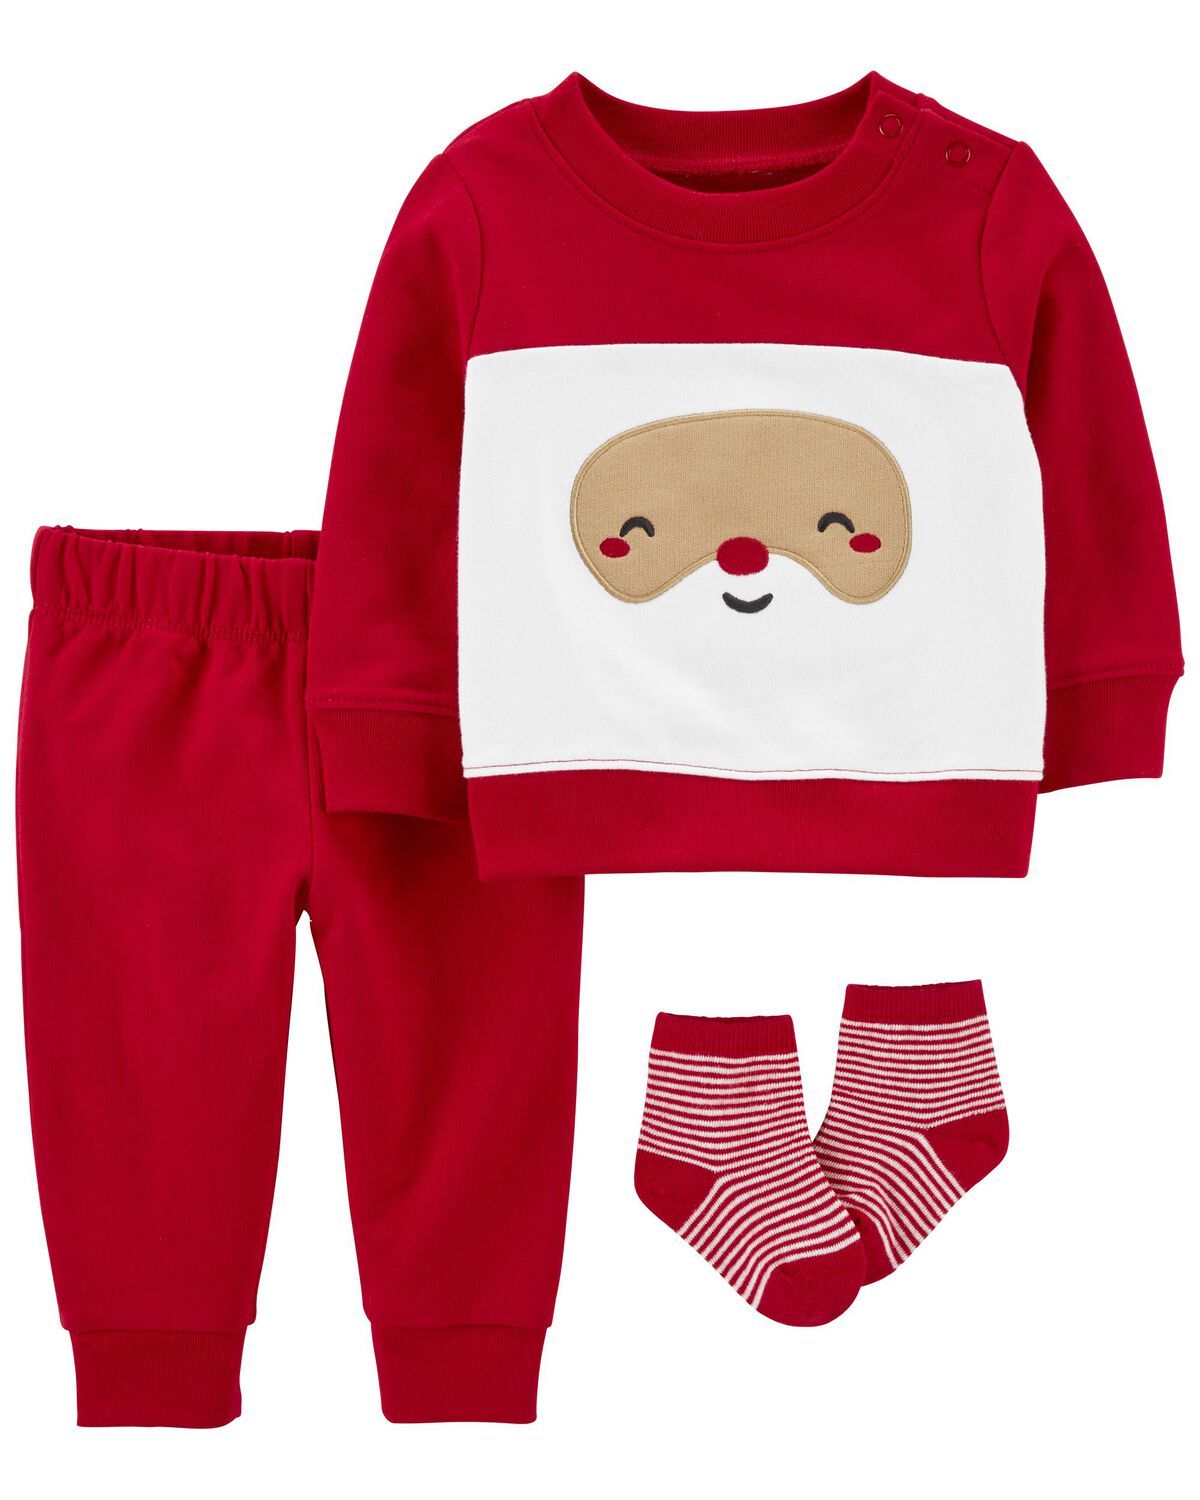 Red/White Baby 3-Piece Santa Outfit Set | carters.com | Carter's